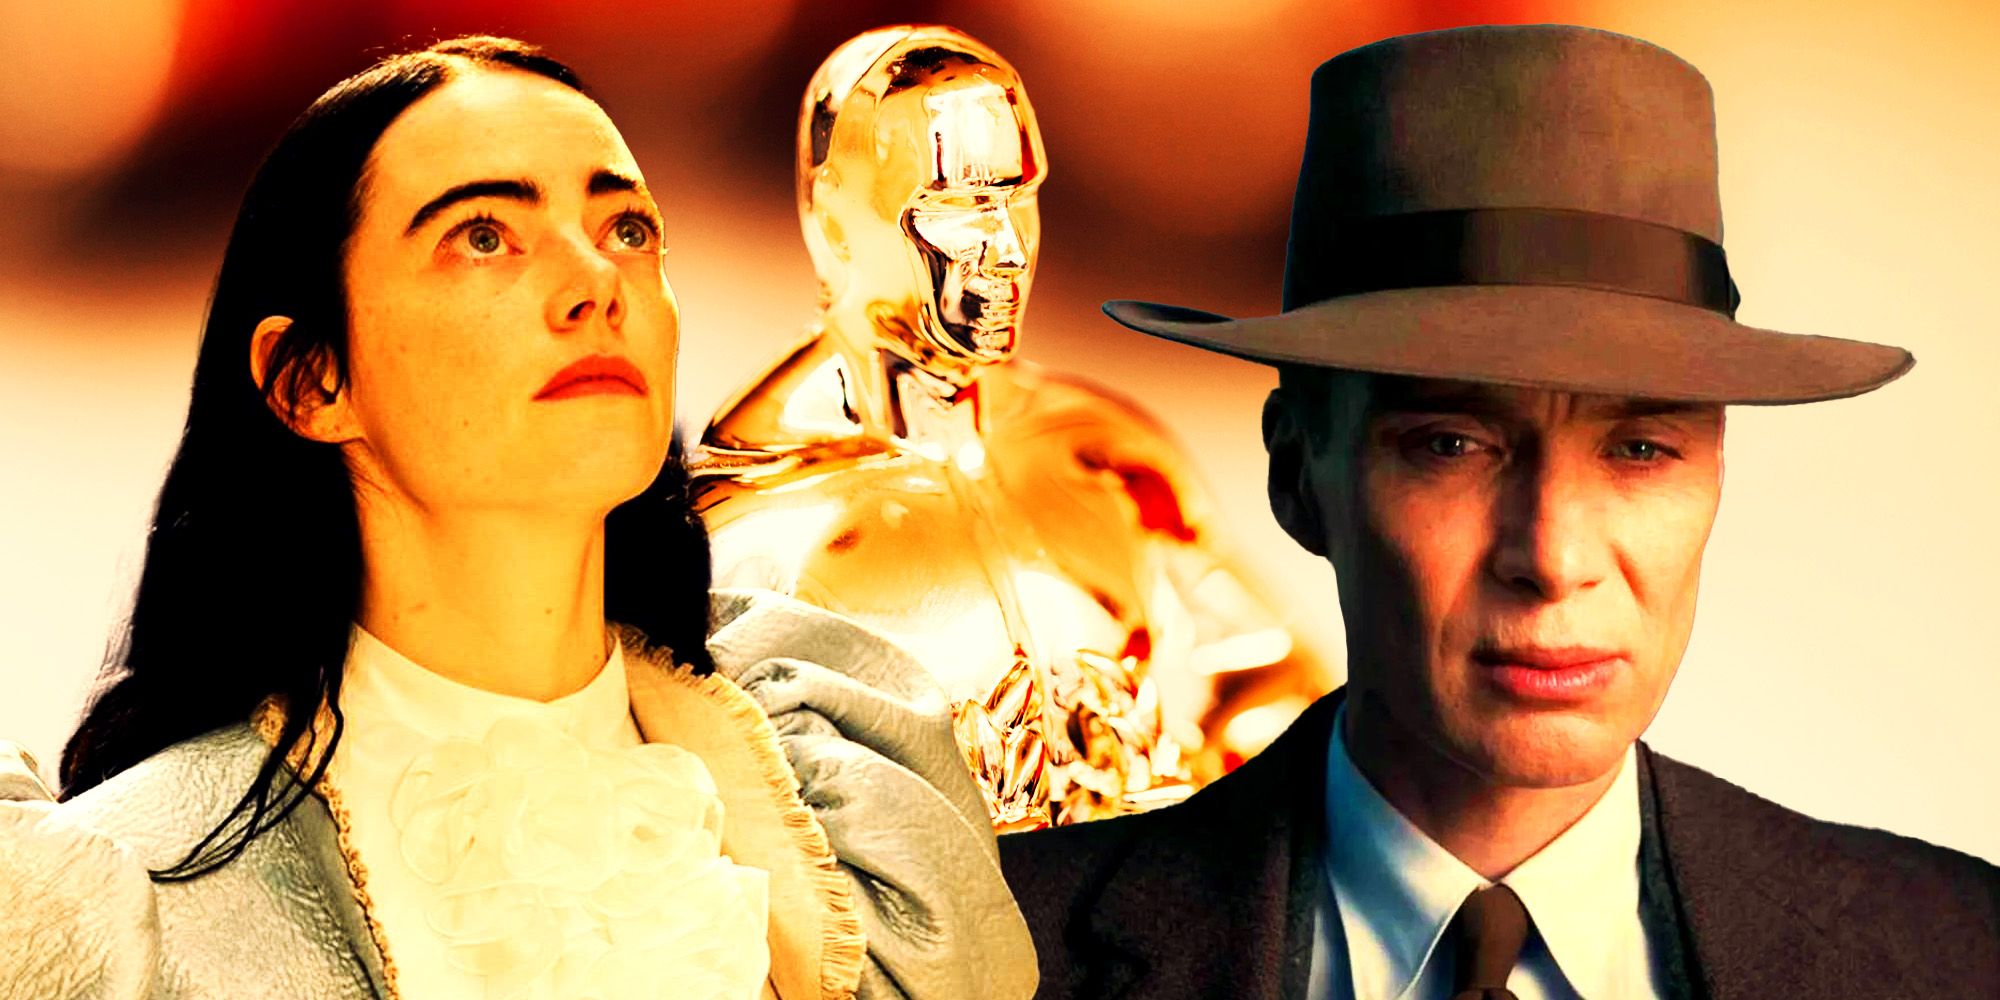 Collage of Emma Stone in Poor Things, the Oscars statue, and Cillian Murphy in Oppenheimer